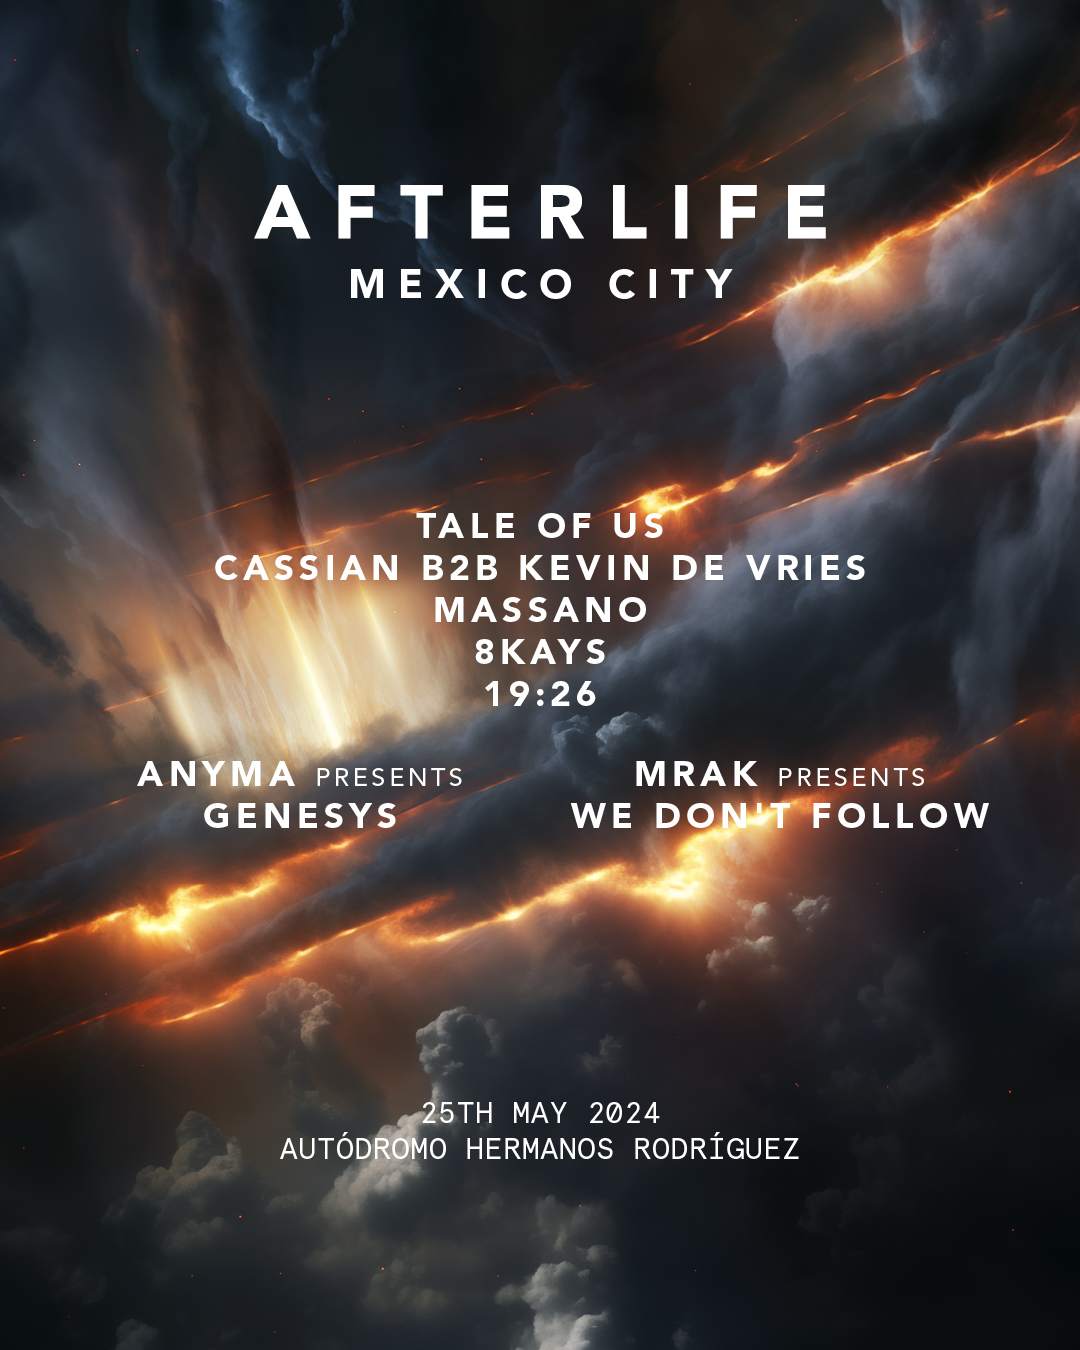 Afterlife Mexico City 2024 - フライヤー裏